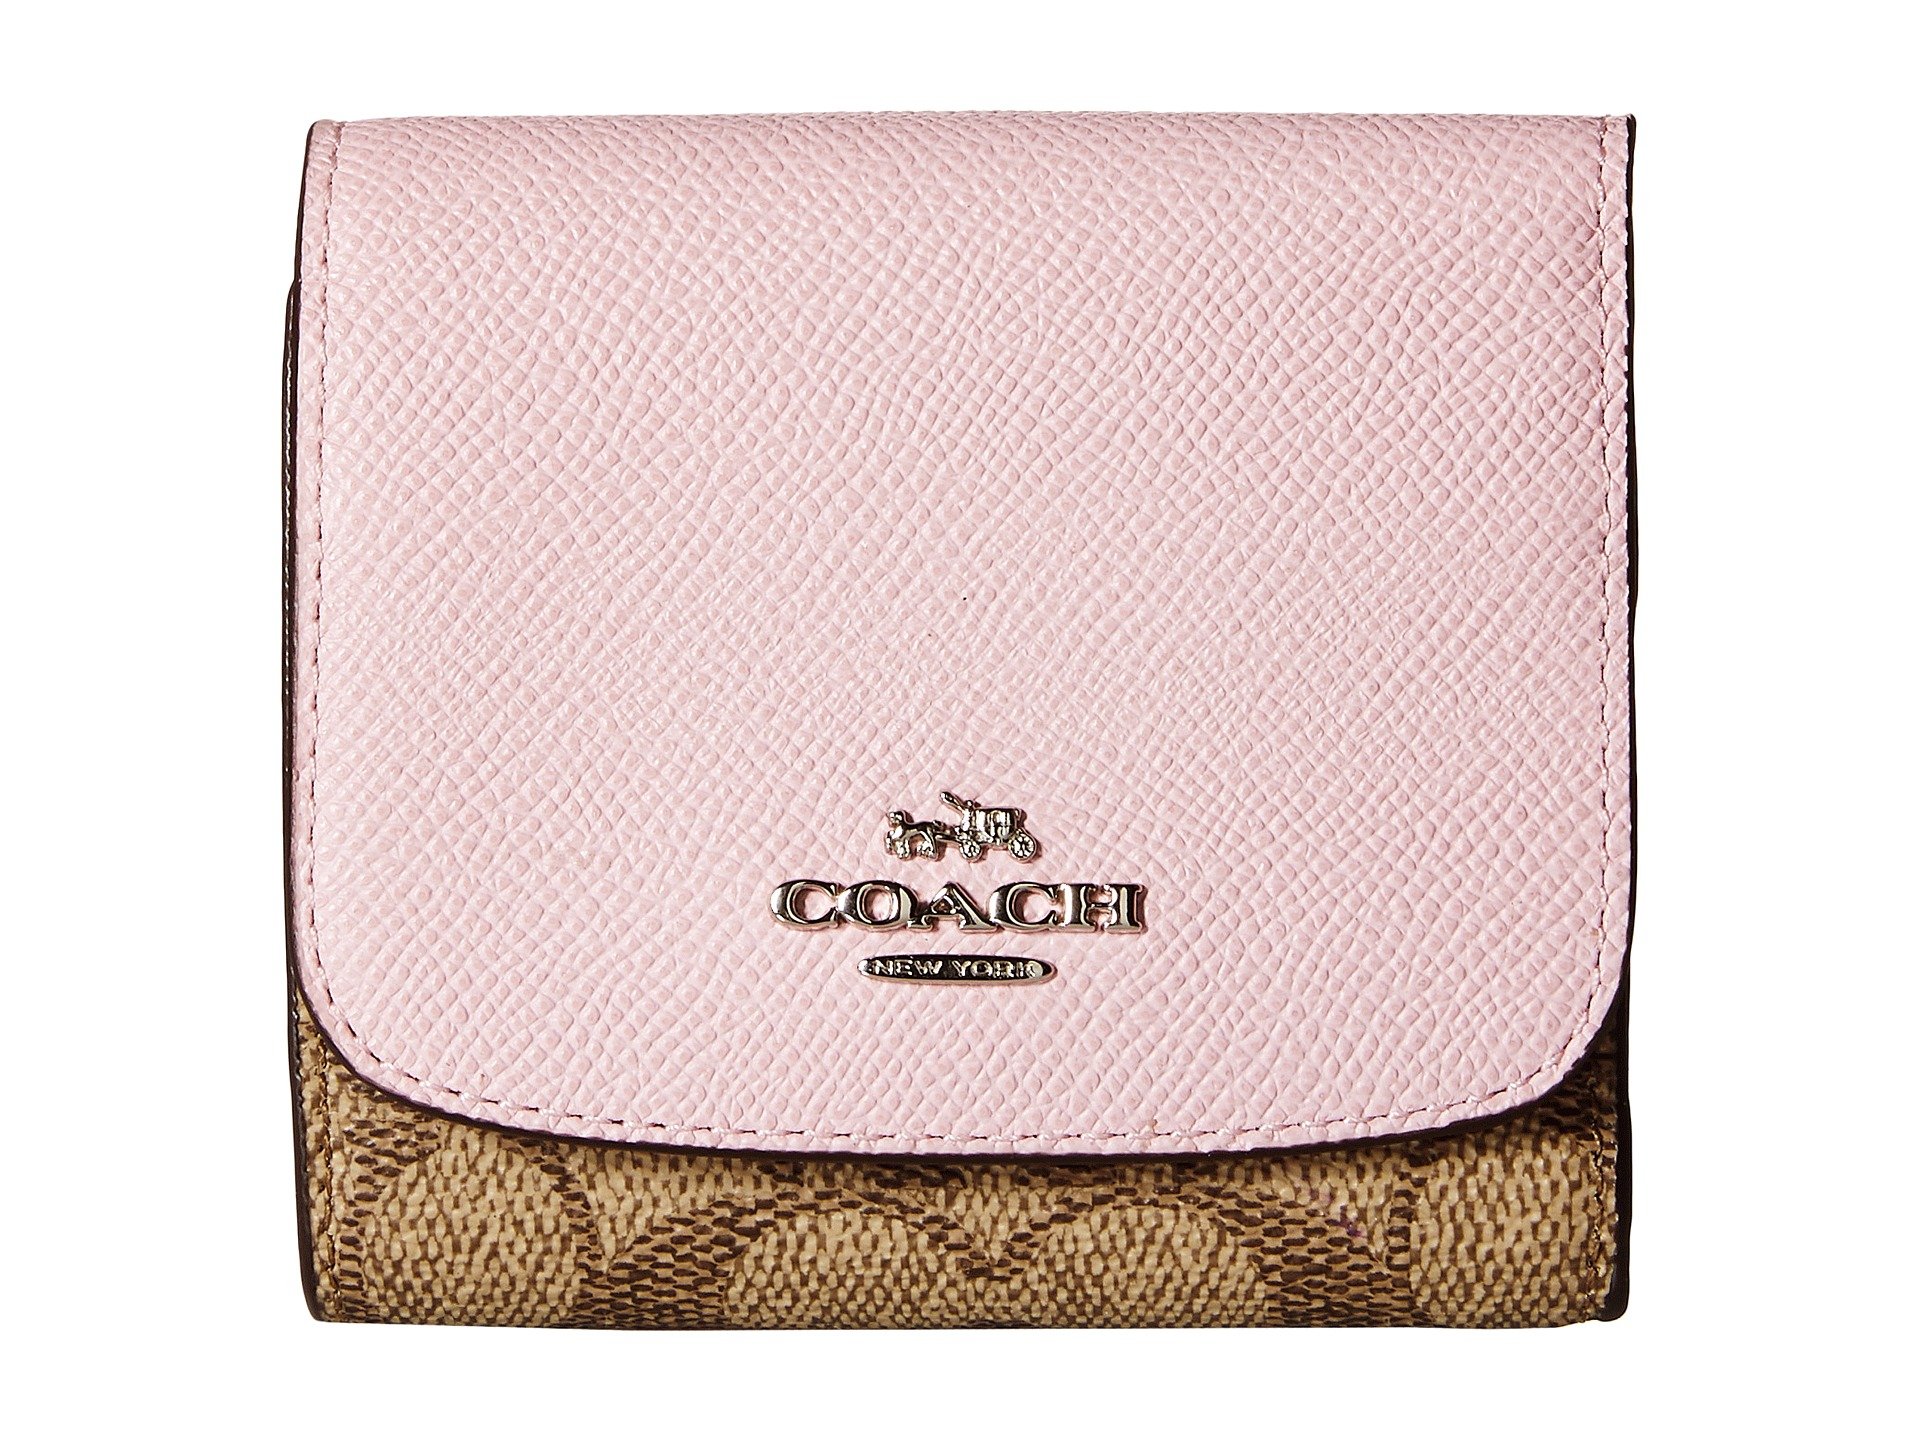 Lyst - Coach Small Wallet in Pink